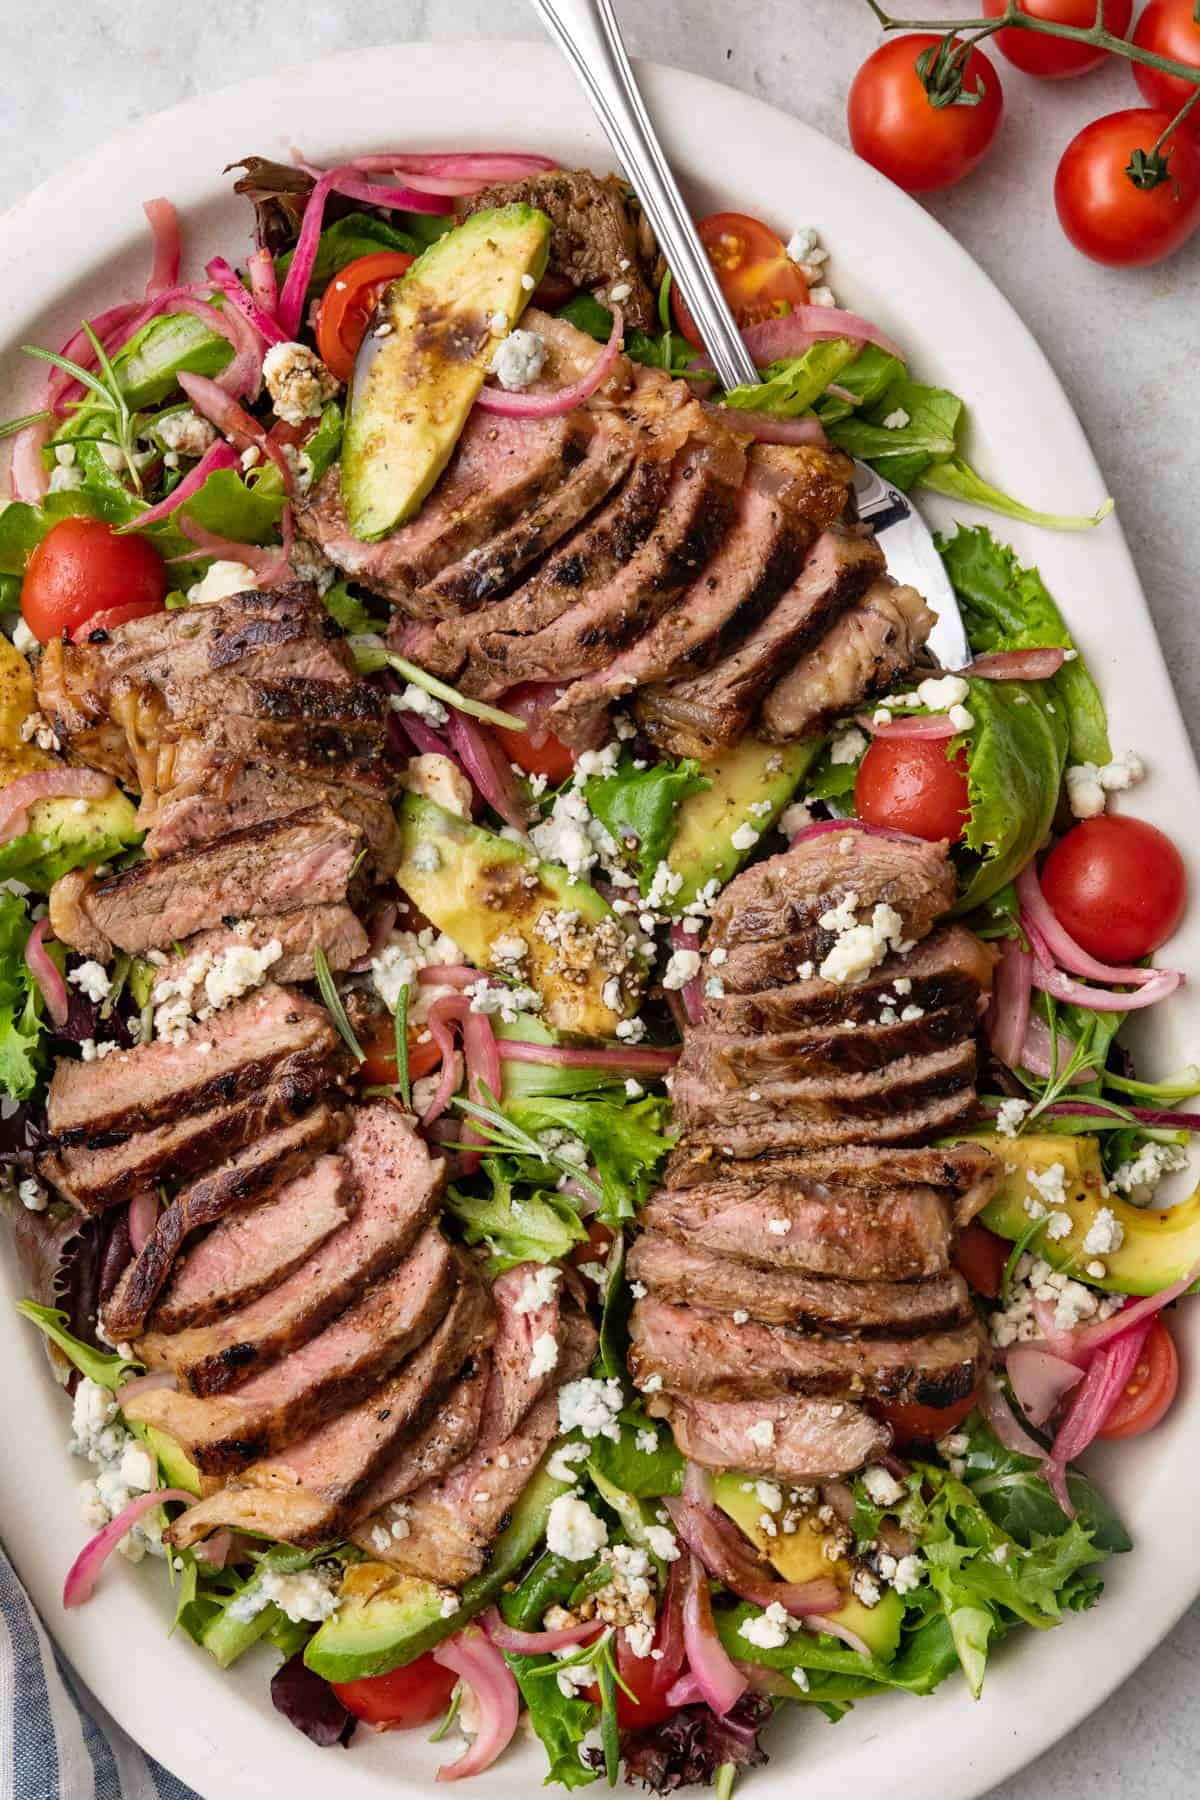 Spoon dipped into a large platter of steak salad.